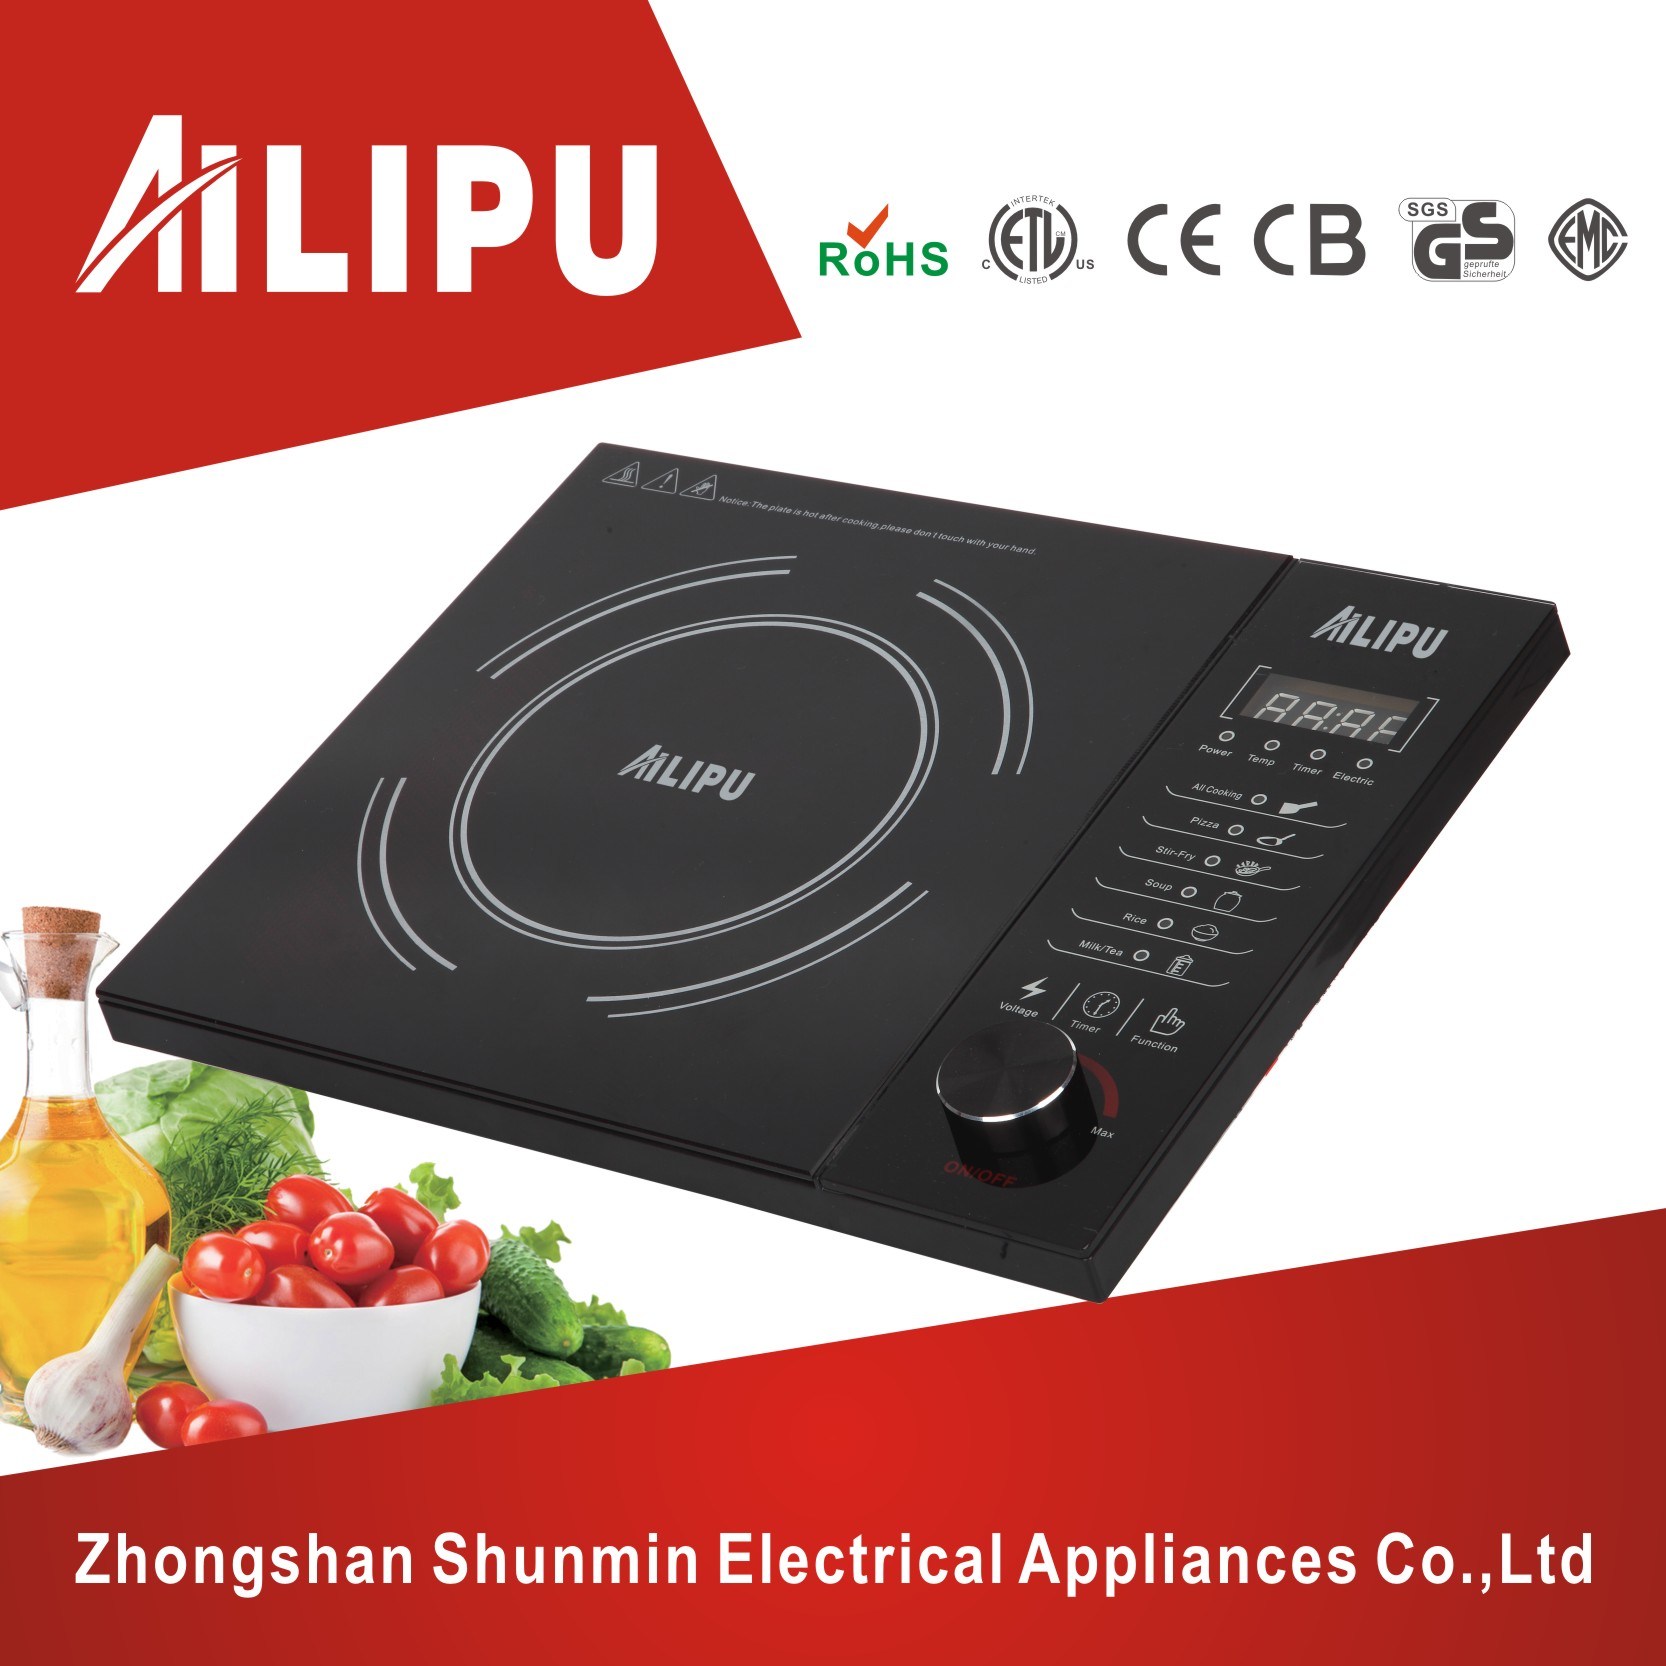 Best Quality Zhongshan Cooker/Electric Stove/Induction Cooker/Touch&Knob Control Cooktop